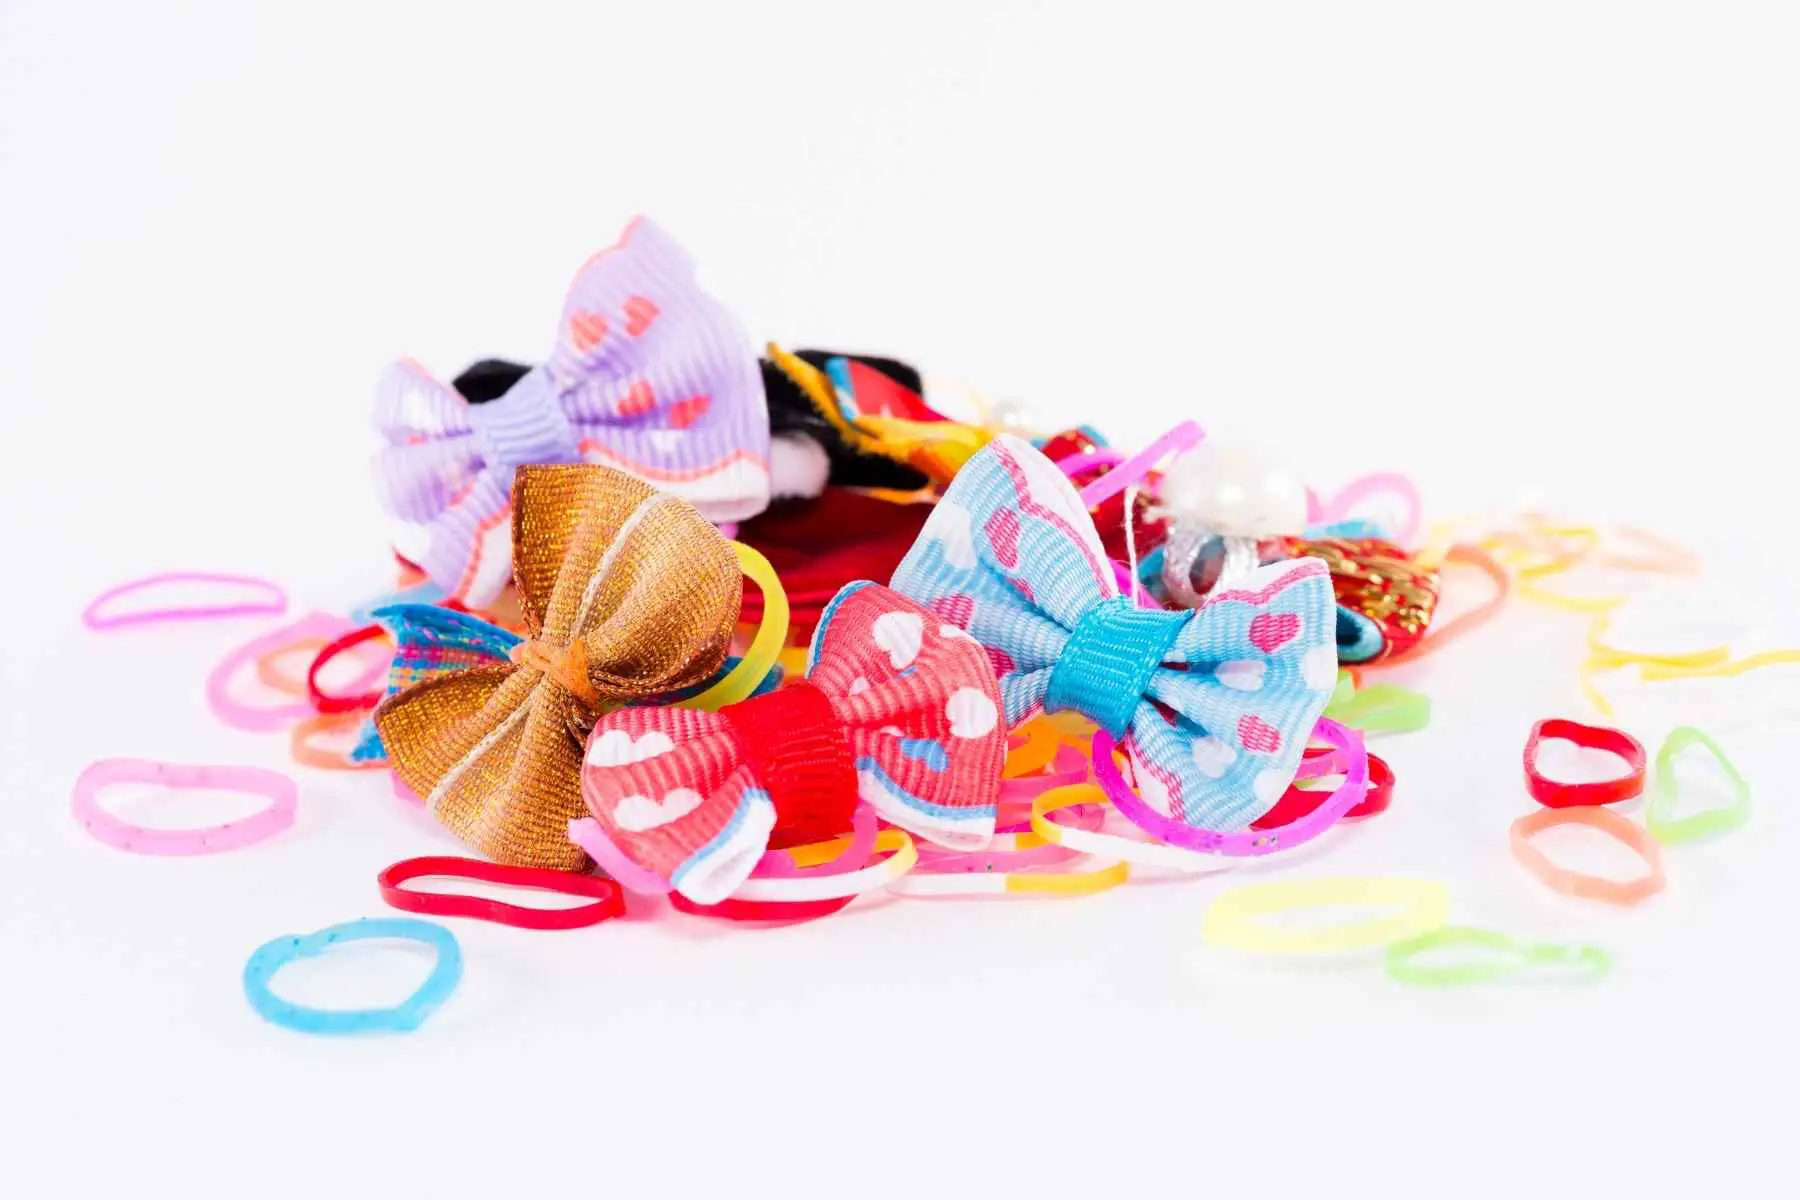 A large number of hair ties in bright colors